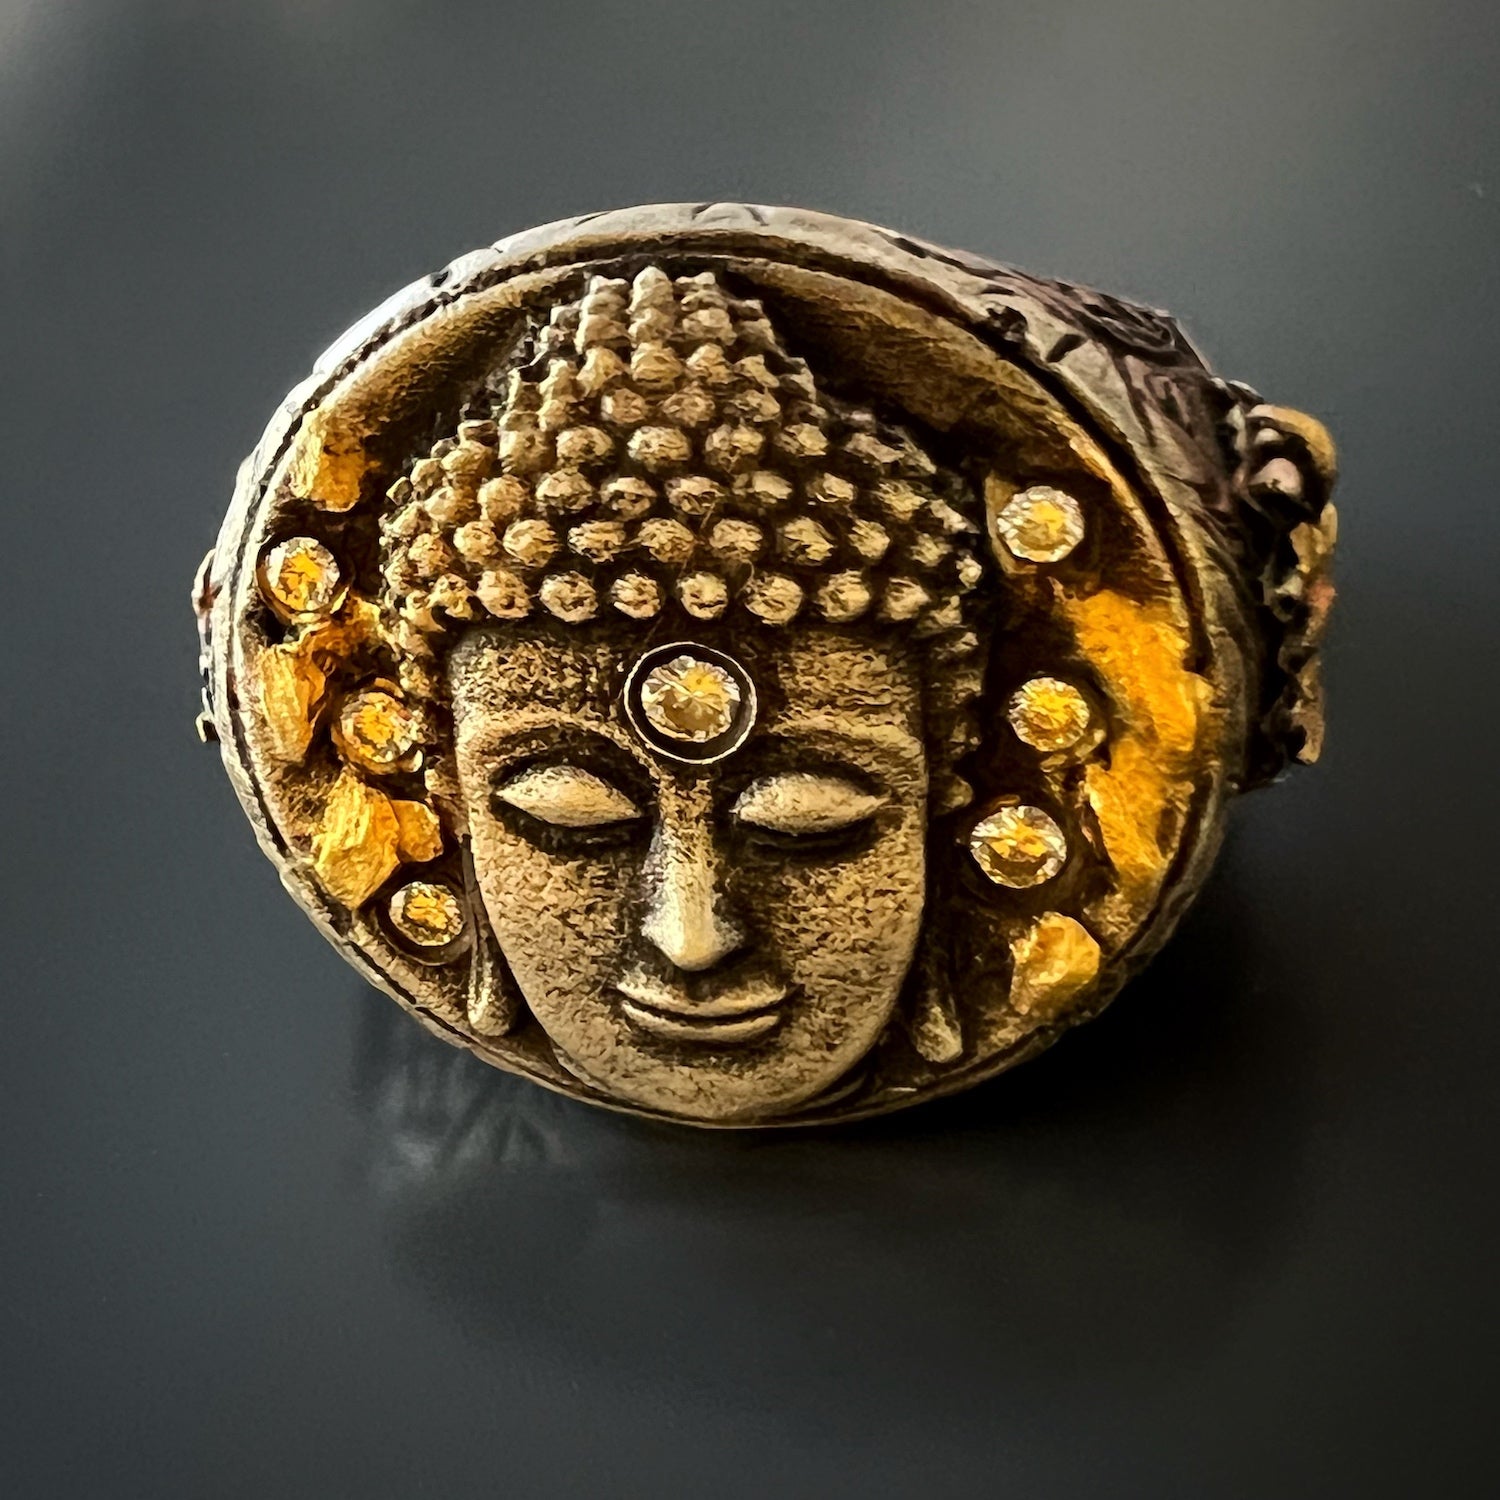 Luxurious Blend - Gold, Diamonds, and Silver in Unique Buddha Ring.